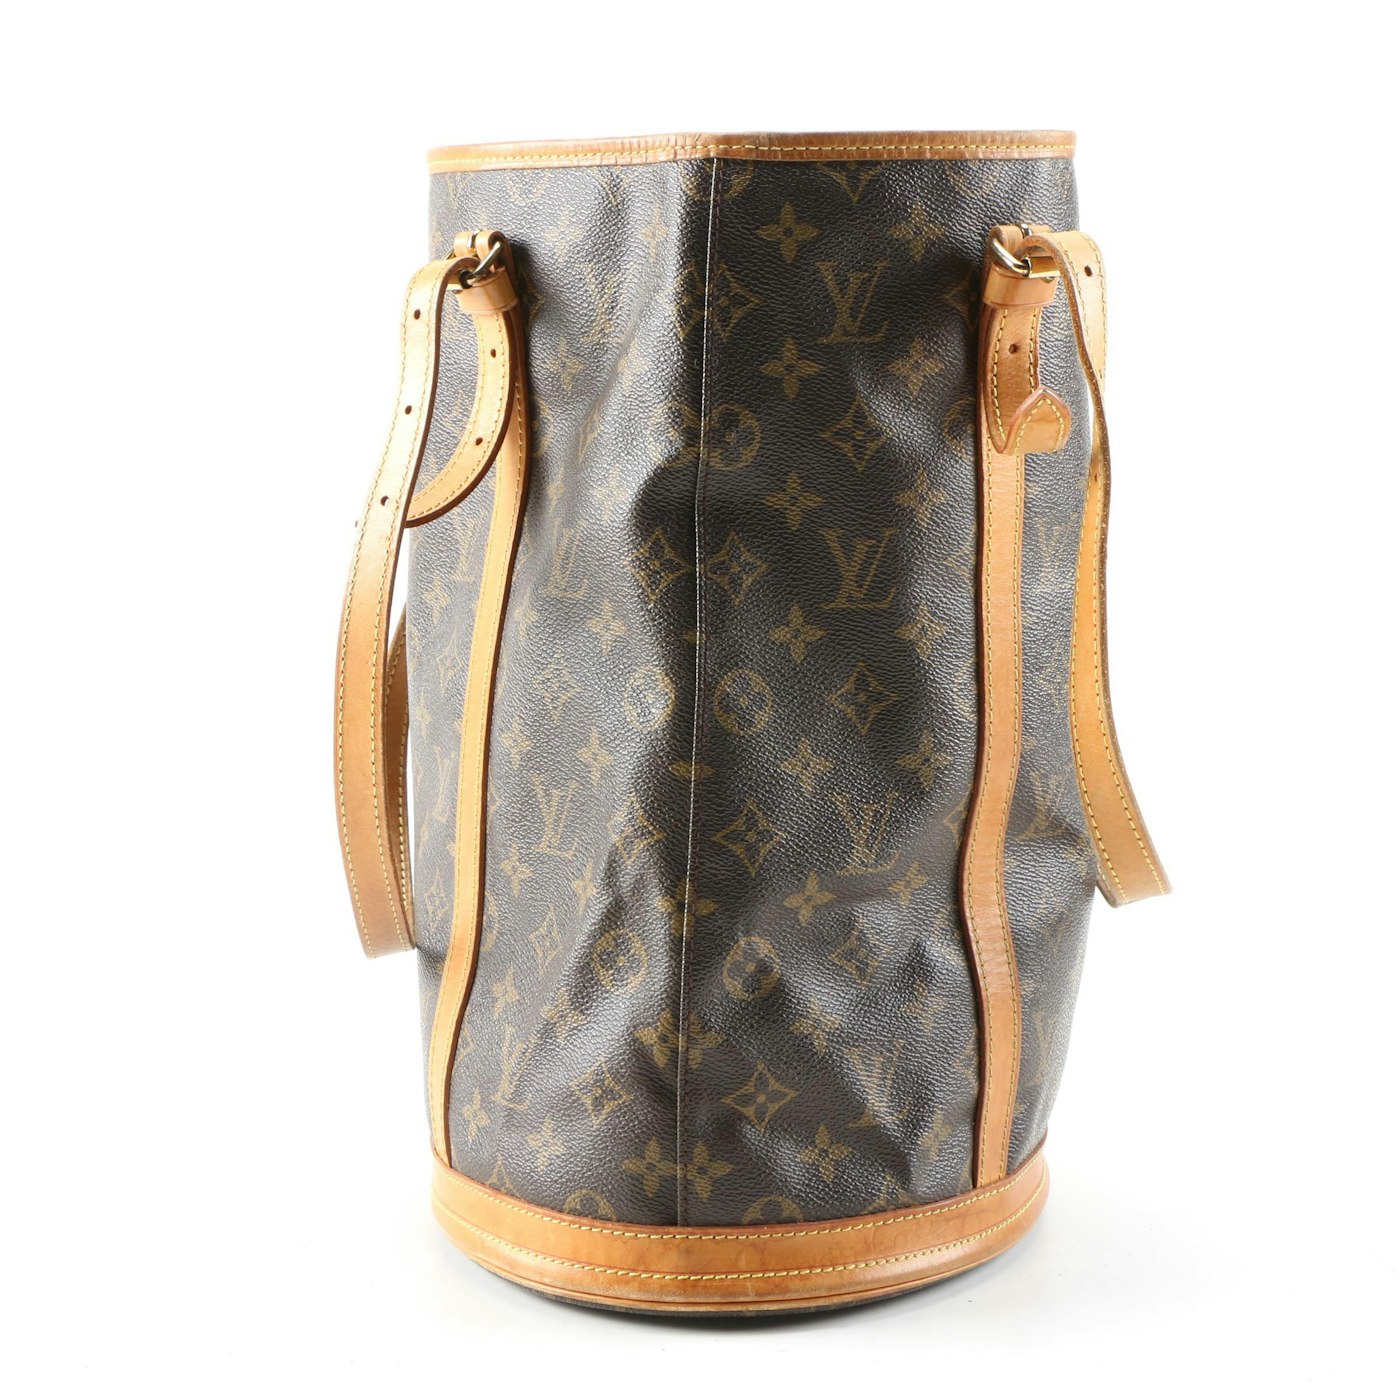 Louis Vuitton Bucket Bag in Monogram Canvas and Leather | EBTH